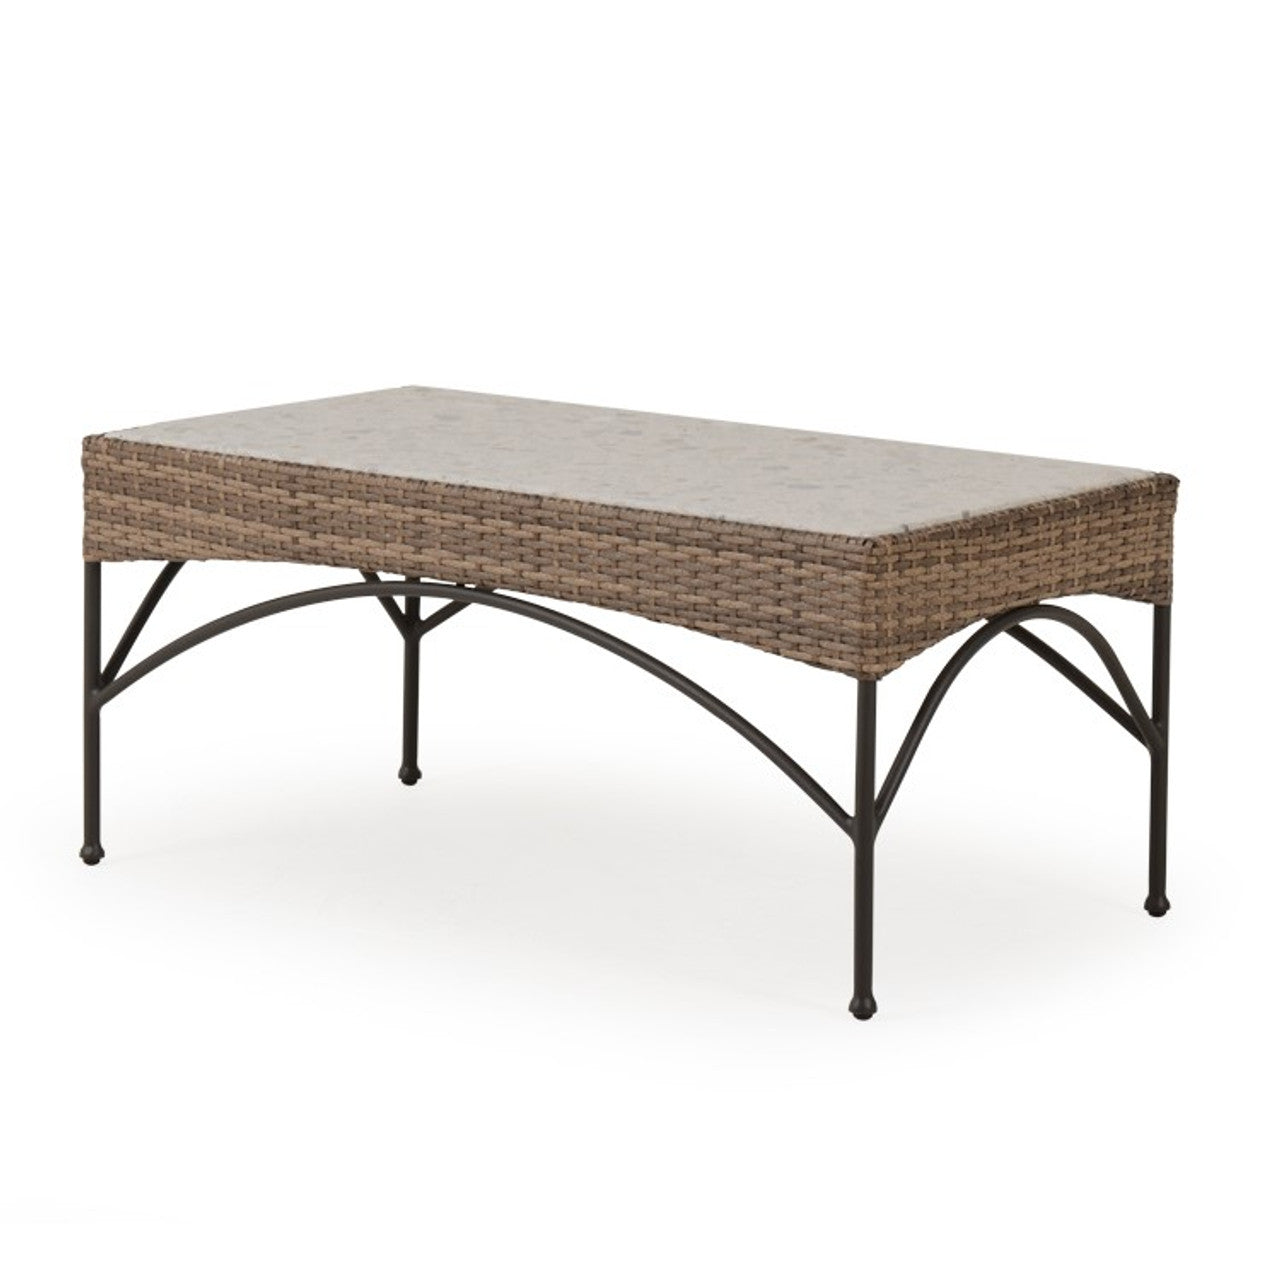 Leaders Furniture Garden Terrace Outdoor Rectangle Wicker Cocktail Table with Stone Top